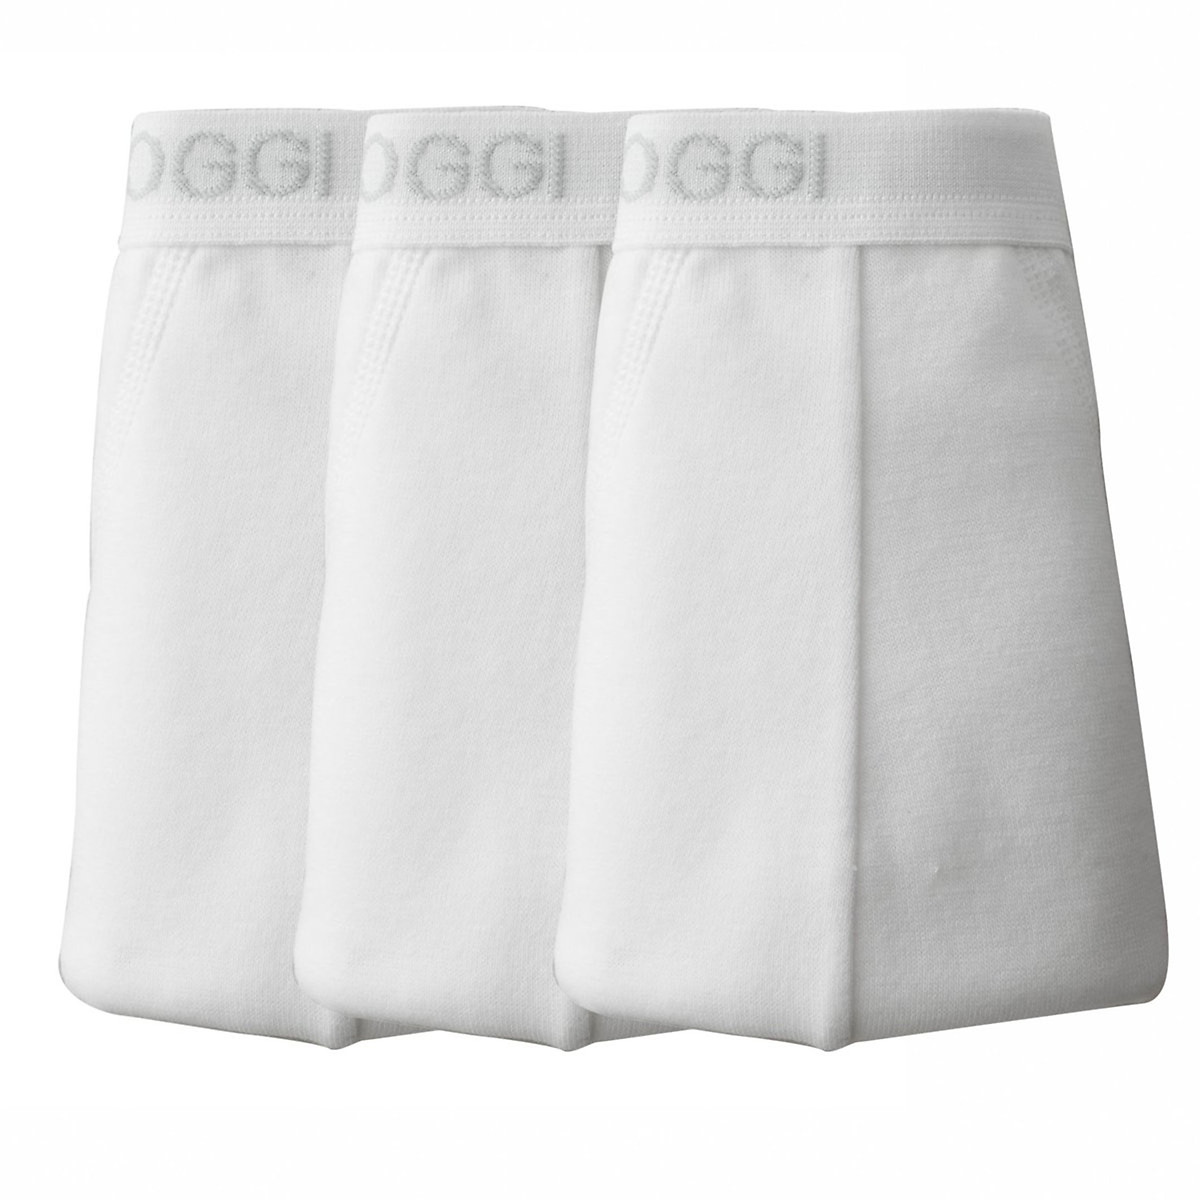 Image of Pack of 3 Closed Front Midi Briefs in Cotton